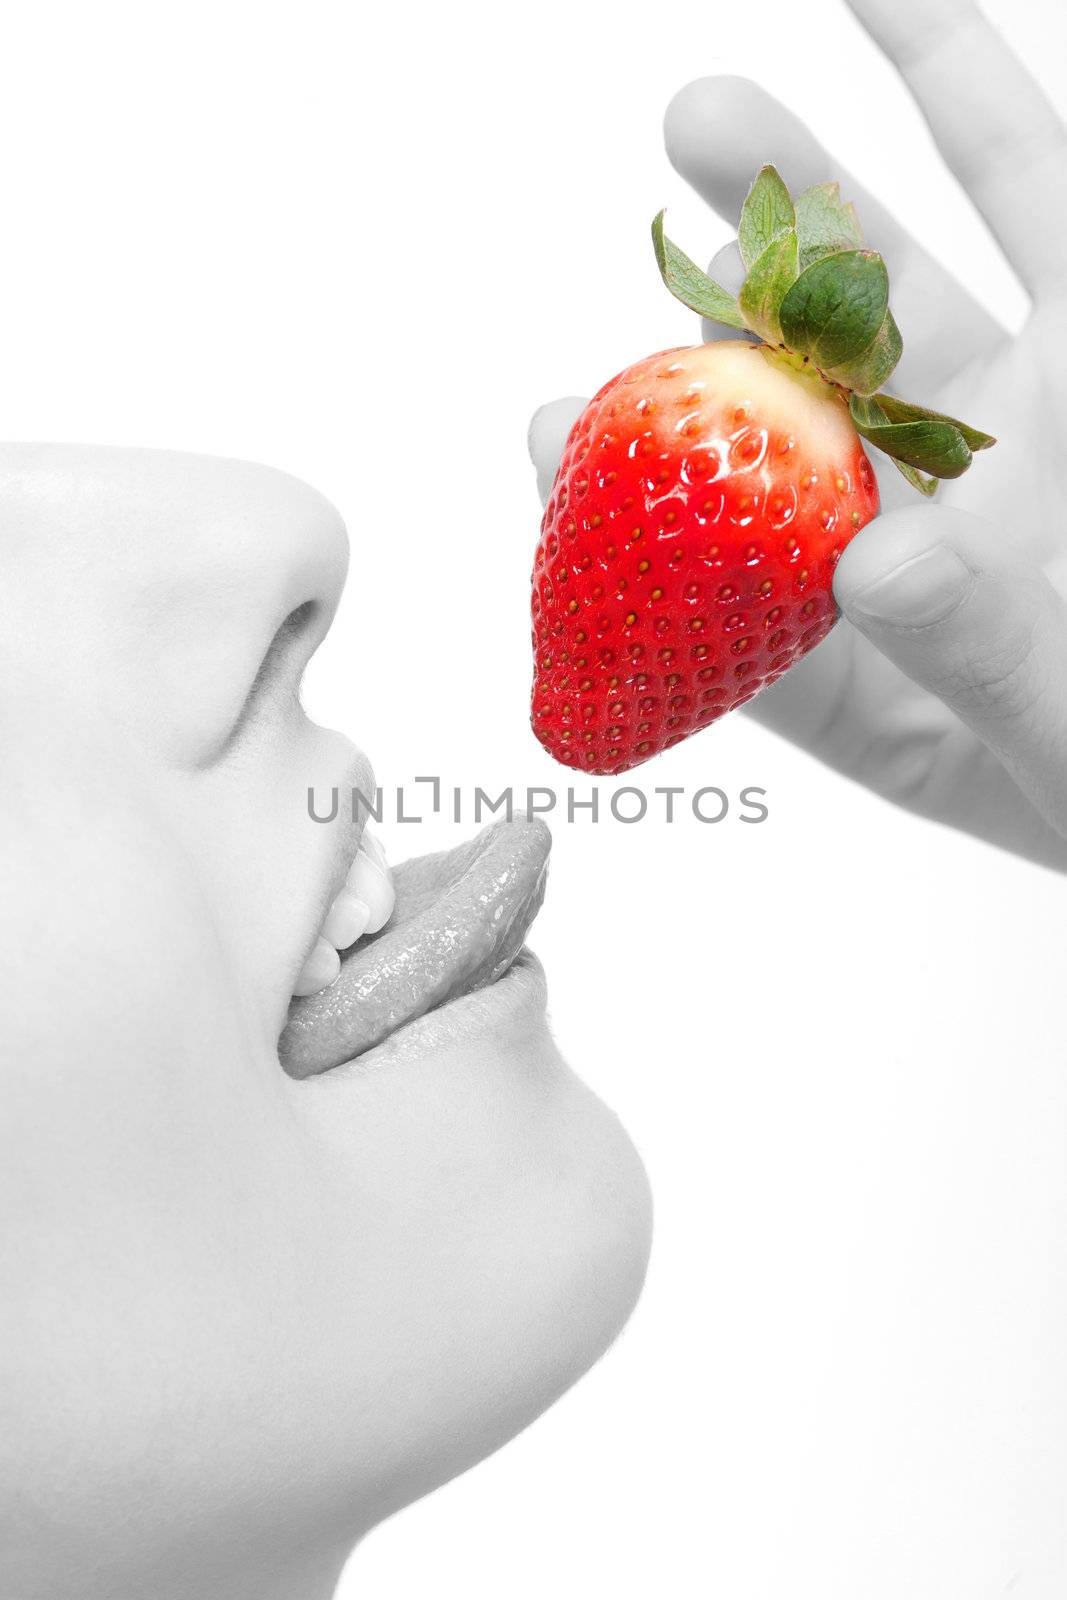 close-up woman�s lips and a strawberry